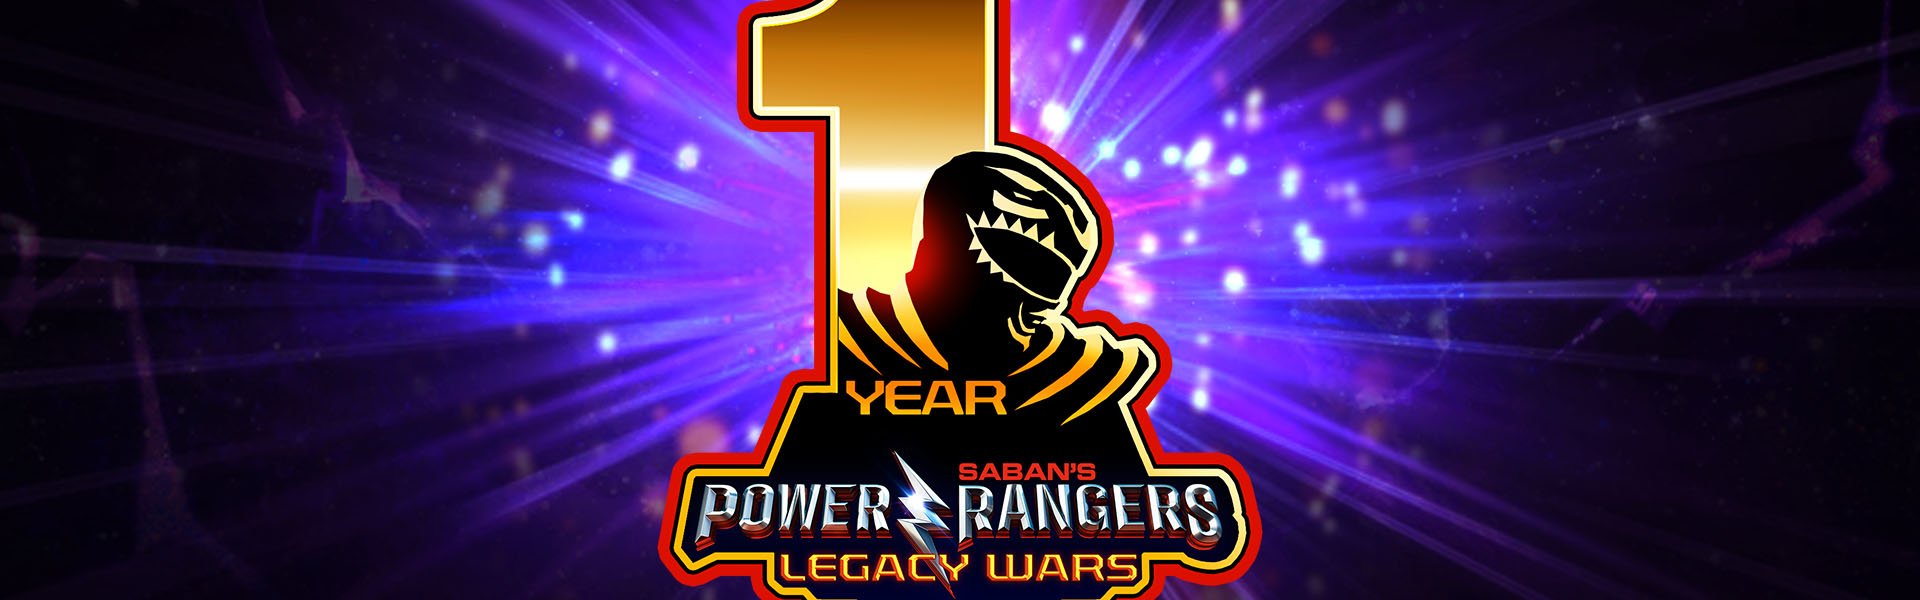 nWay Celebrates First Anniversary of Power Rangers: Legacy Wars 4